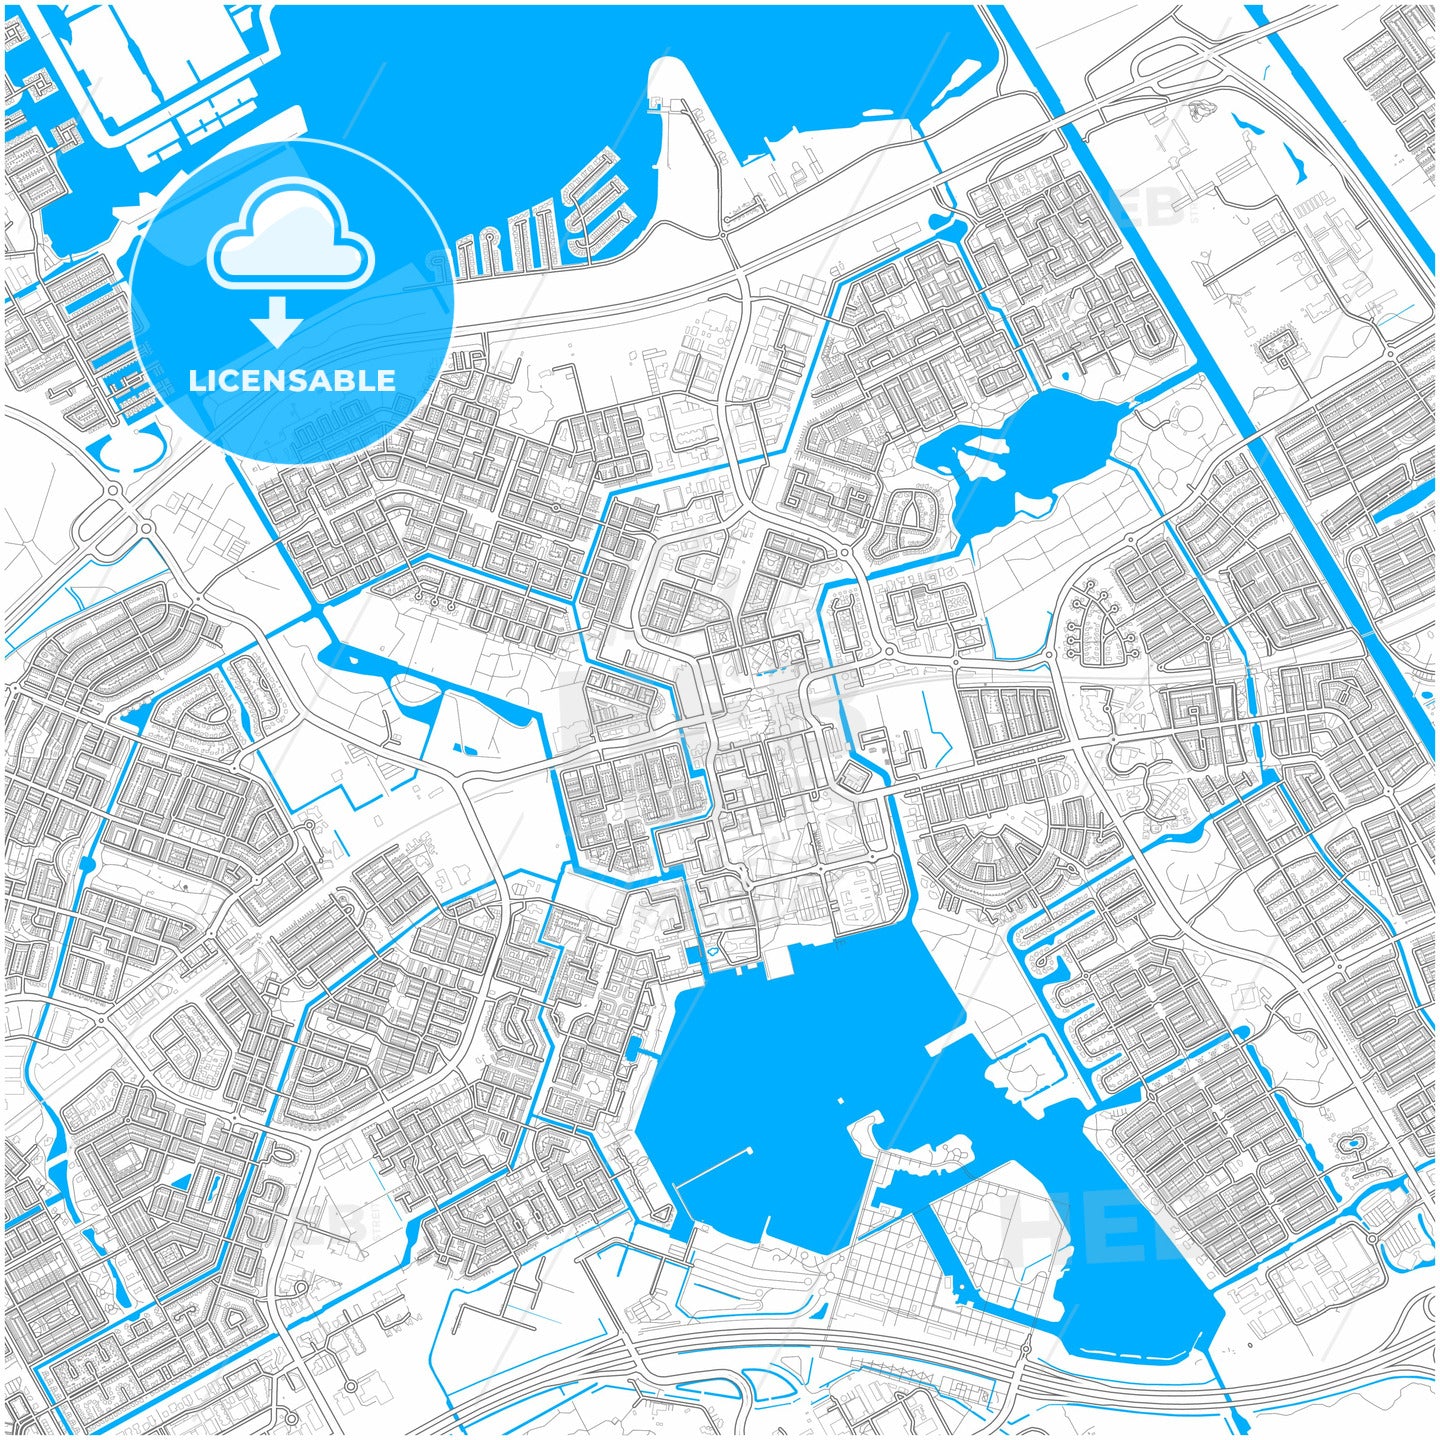 Almere, Flevoland, Netherlands, city map with high quality roads.